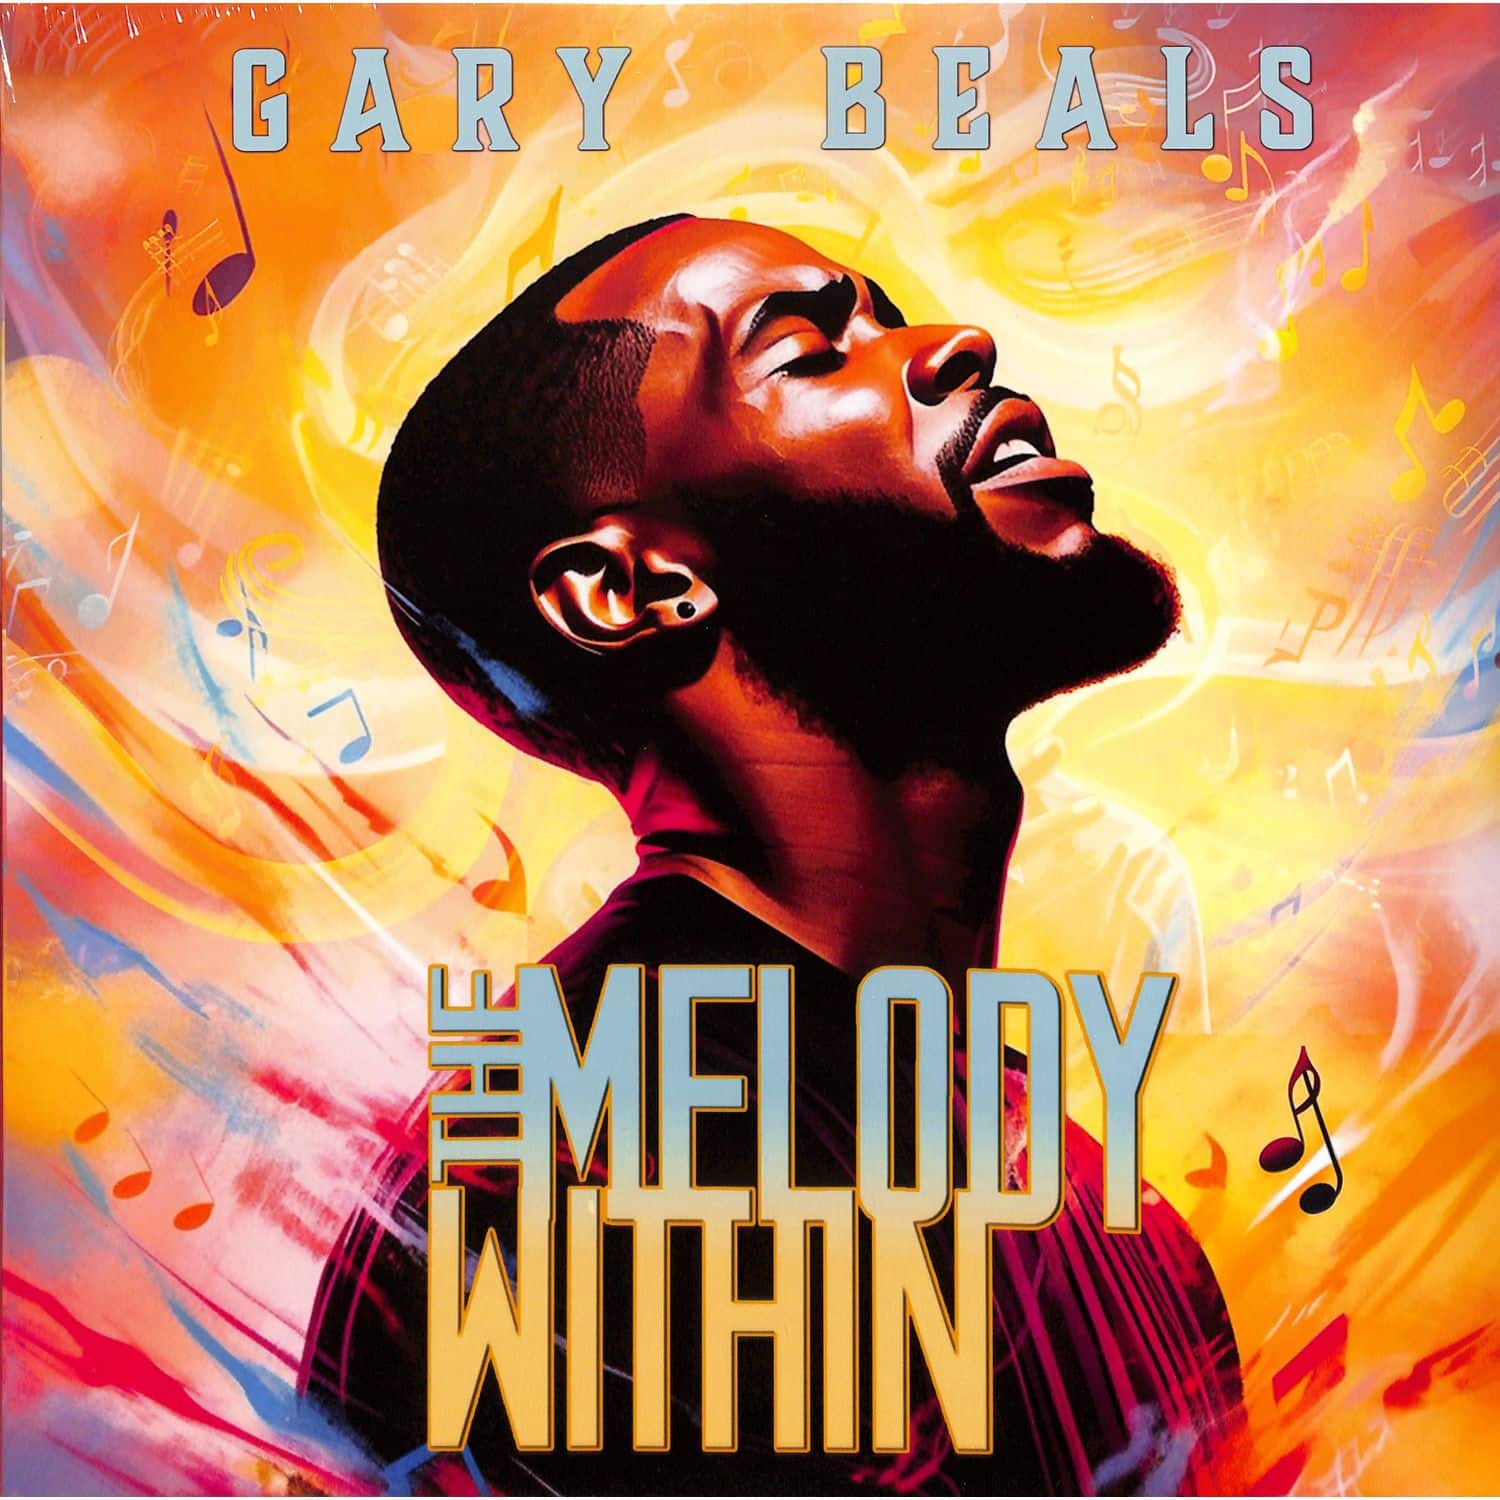 Gary Beals - THE MELODY WITHIN 